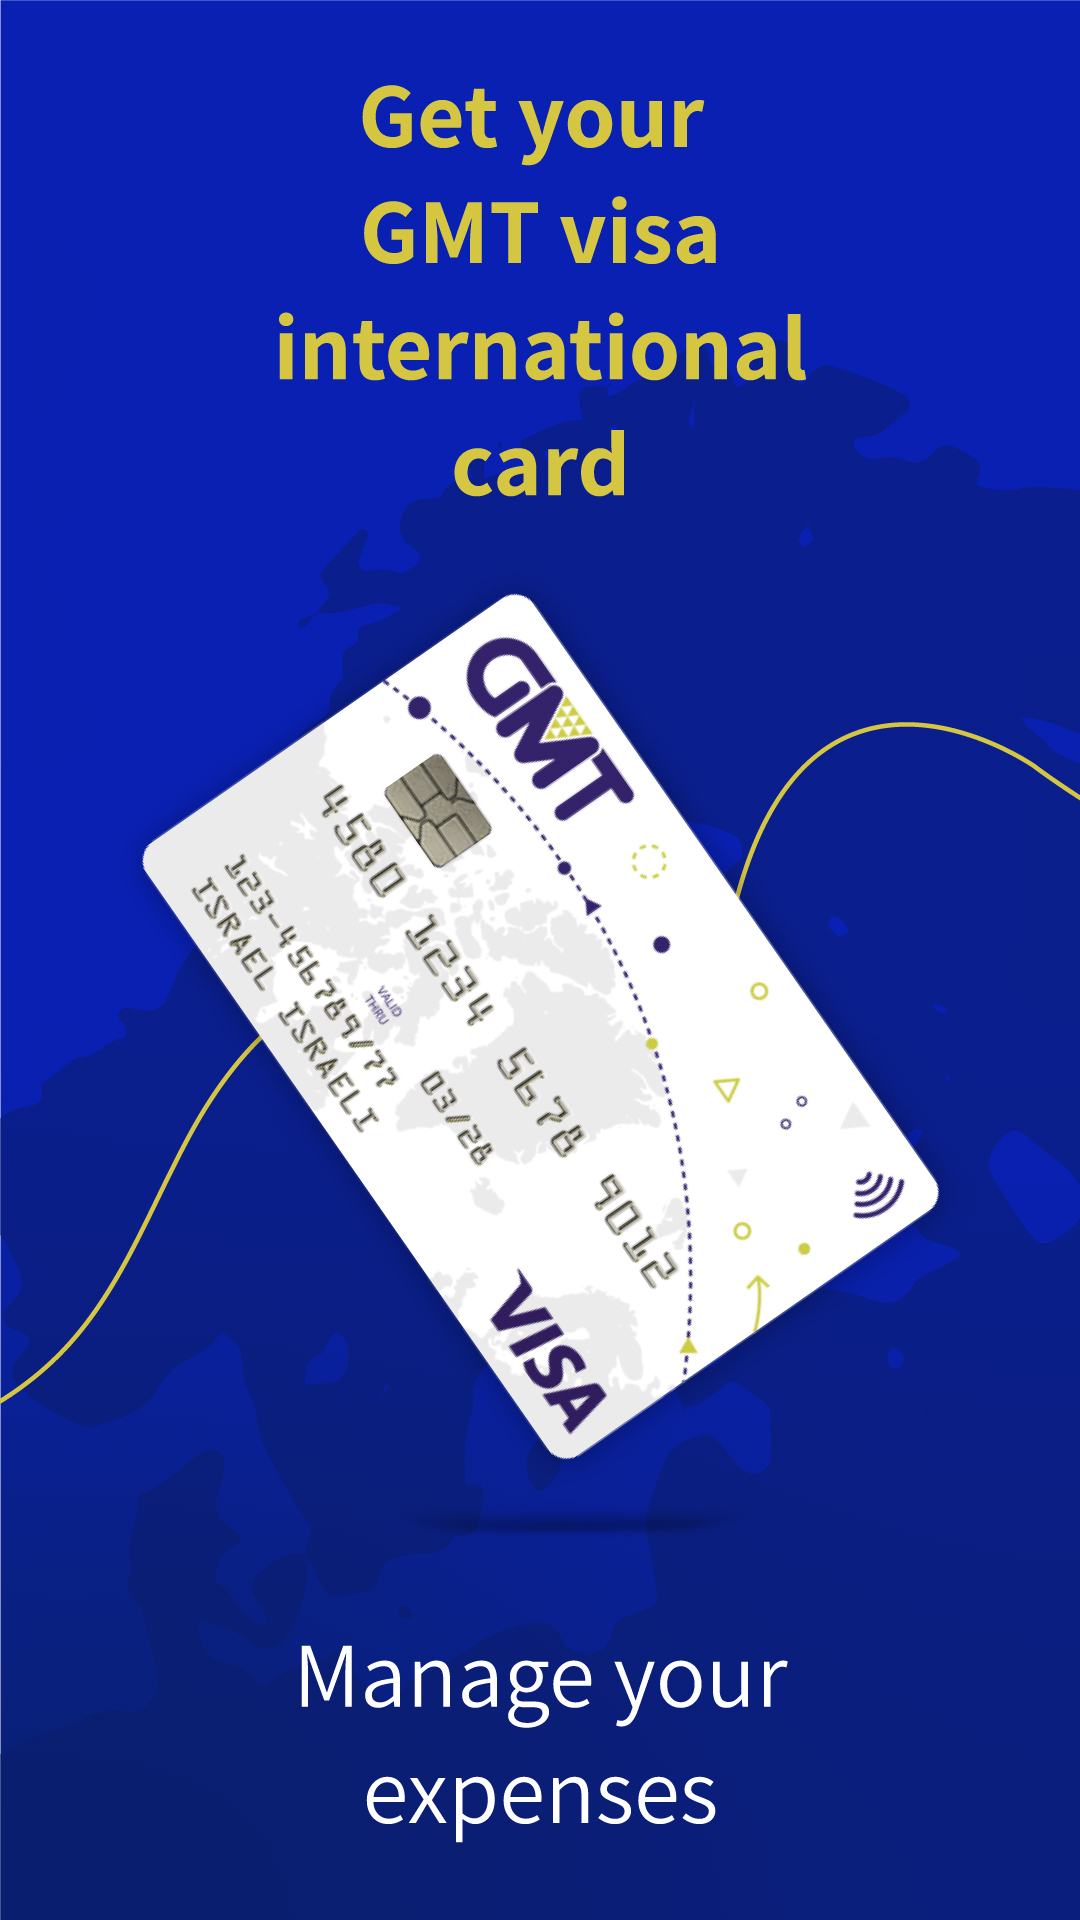 Direct Credit Card Transfers Abroad: myGMT offers a new service enabling direct money transfers to credit cards abroad, providing convenience and flexibility